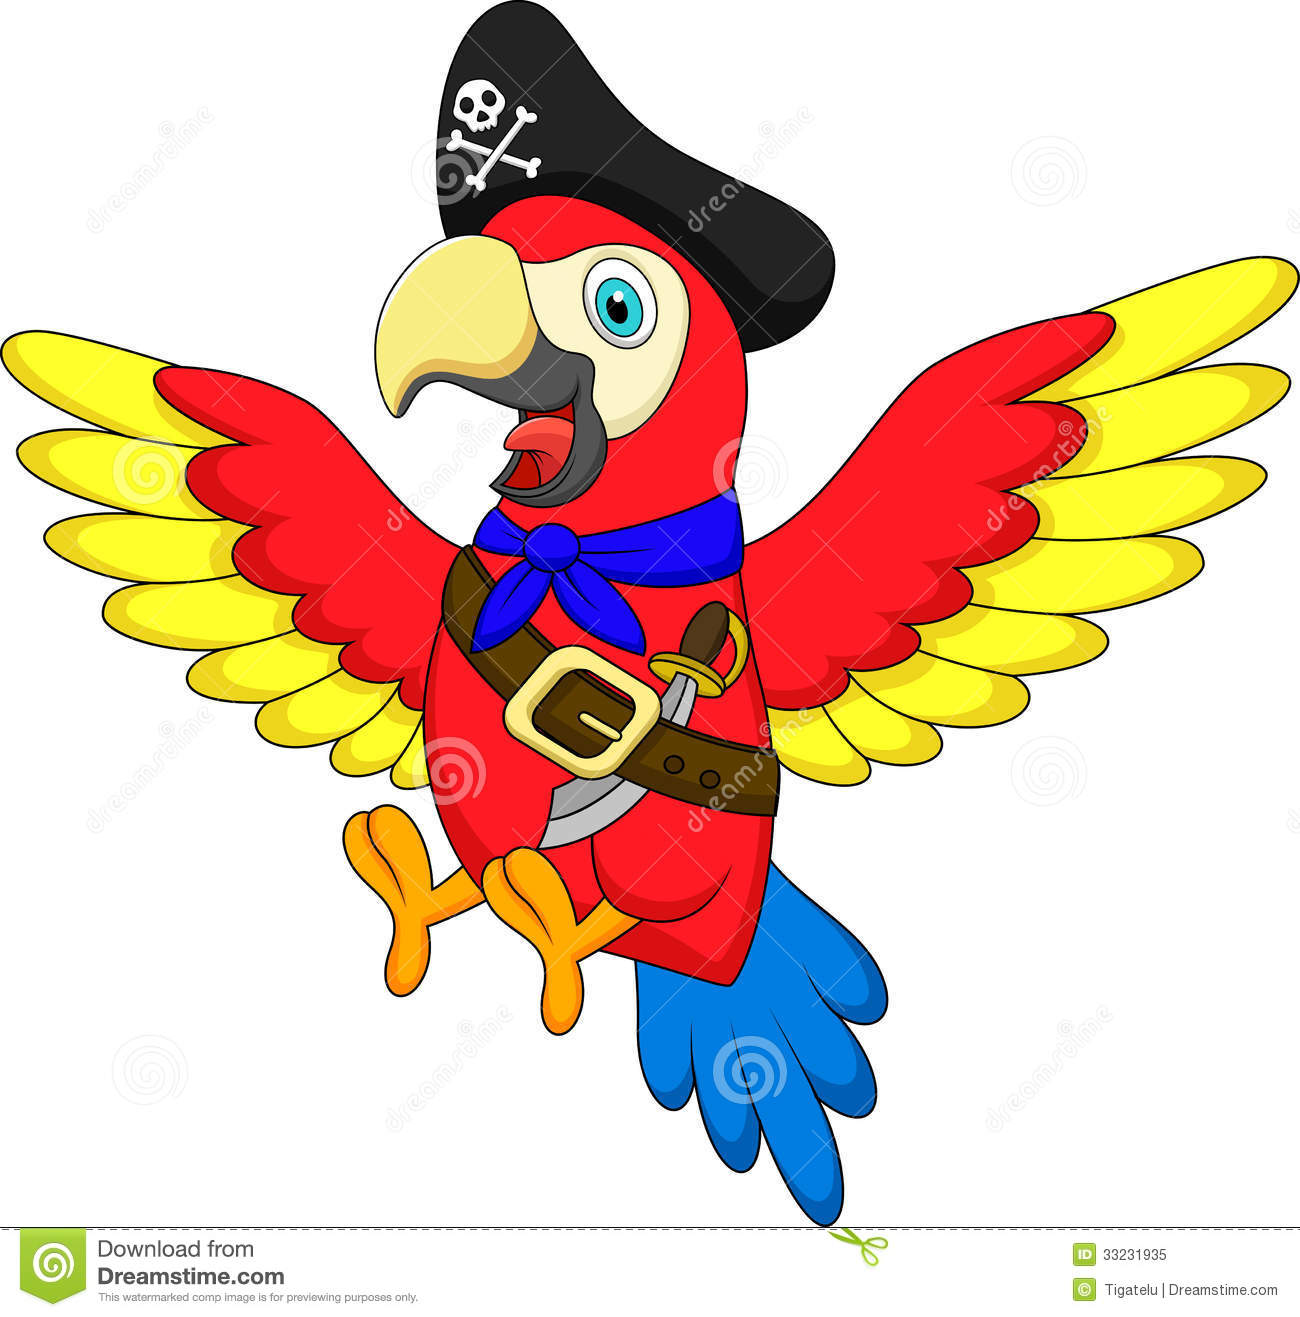 Cute Parrot Pirate Cartoon Royalty Free Stock Photo   Image  33231935